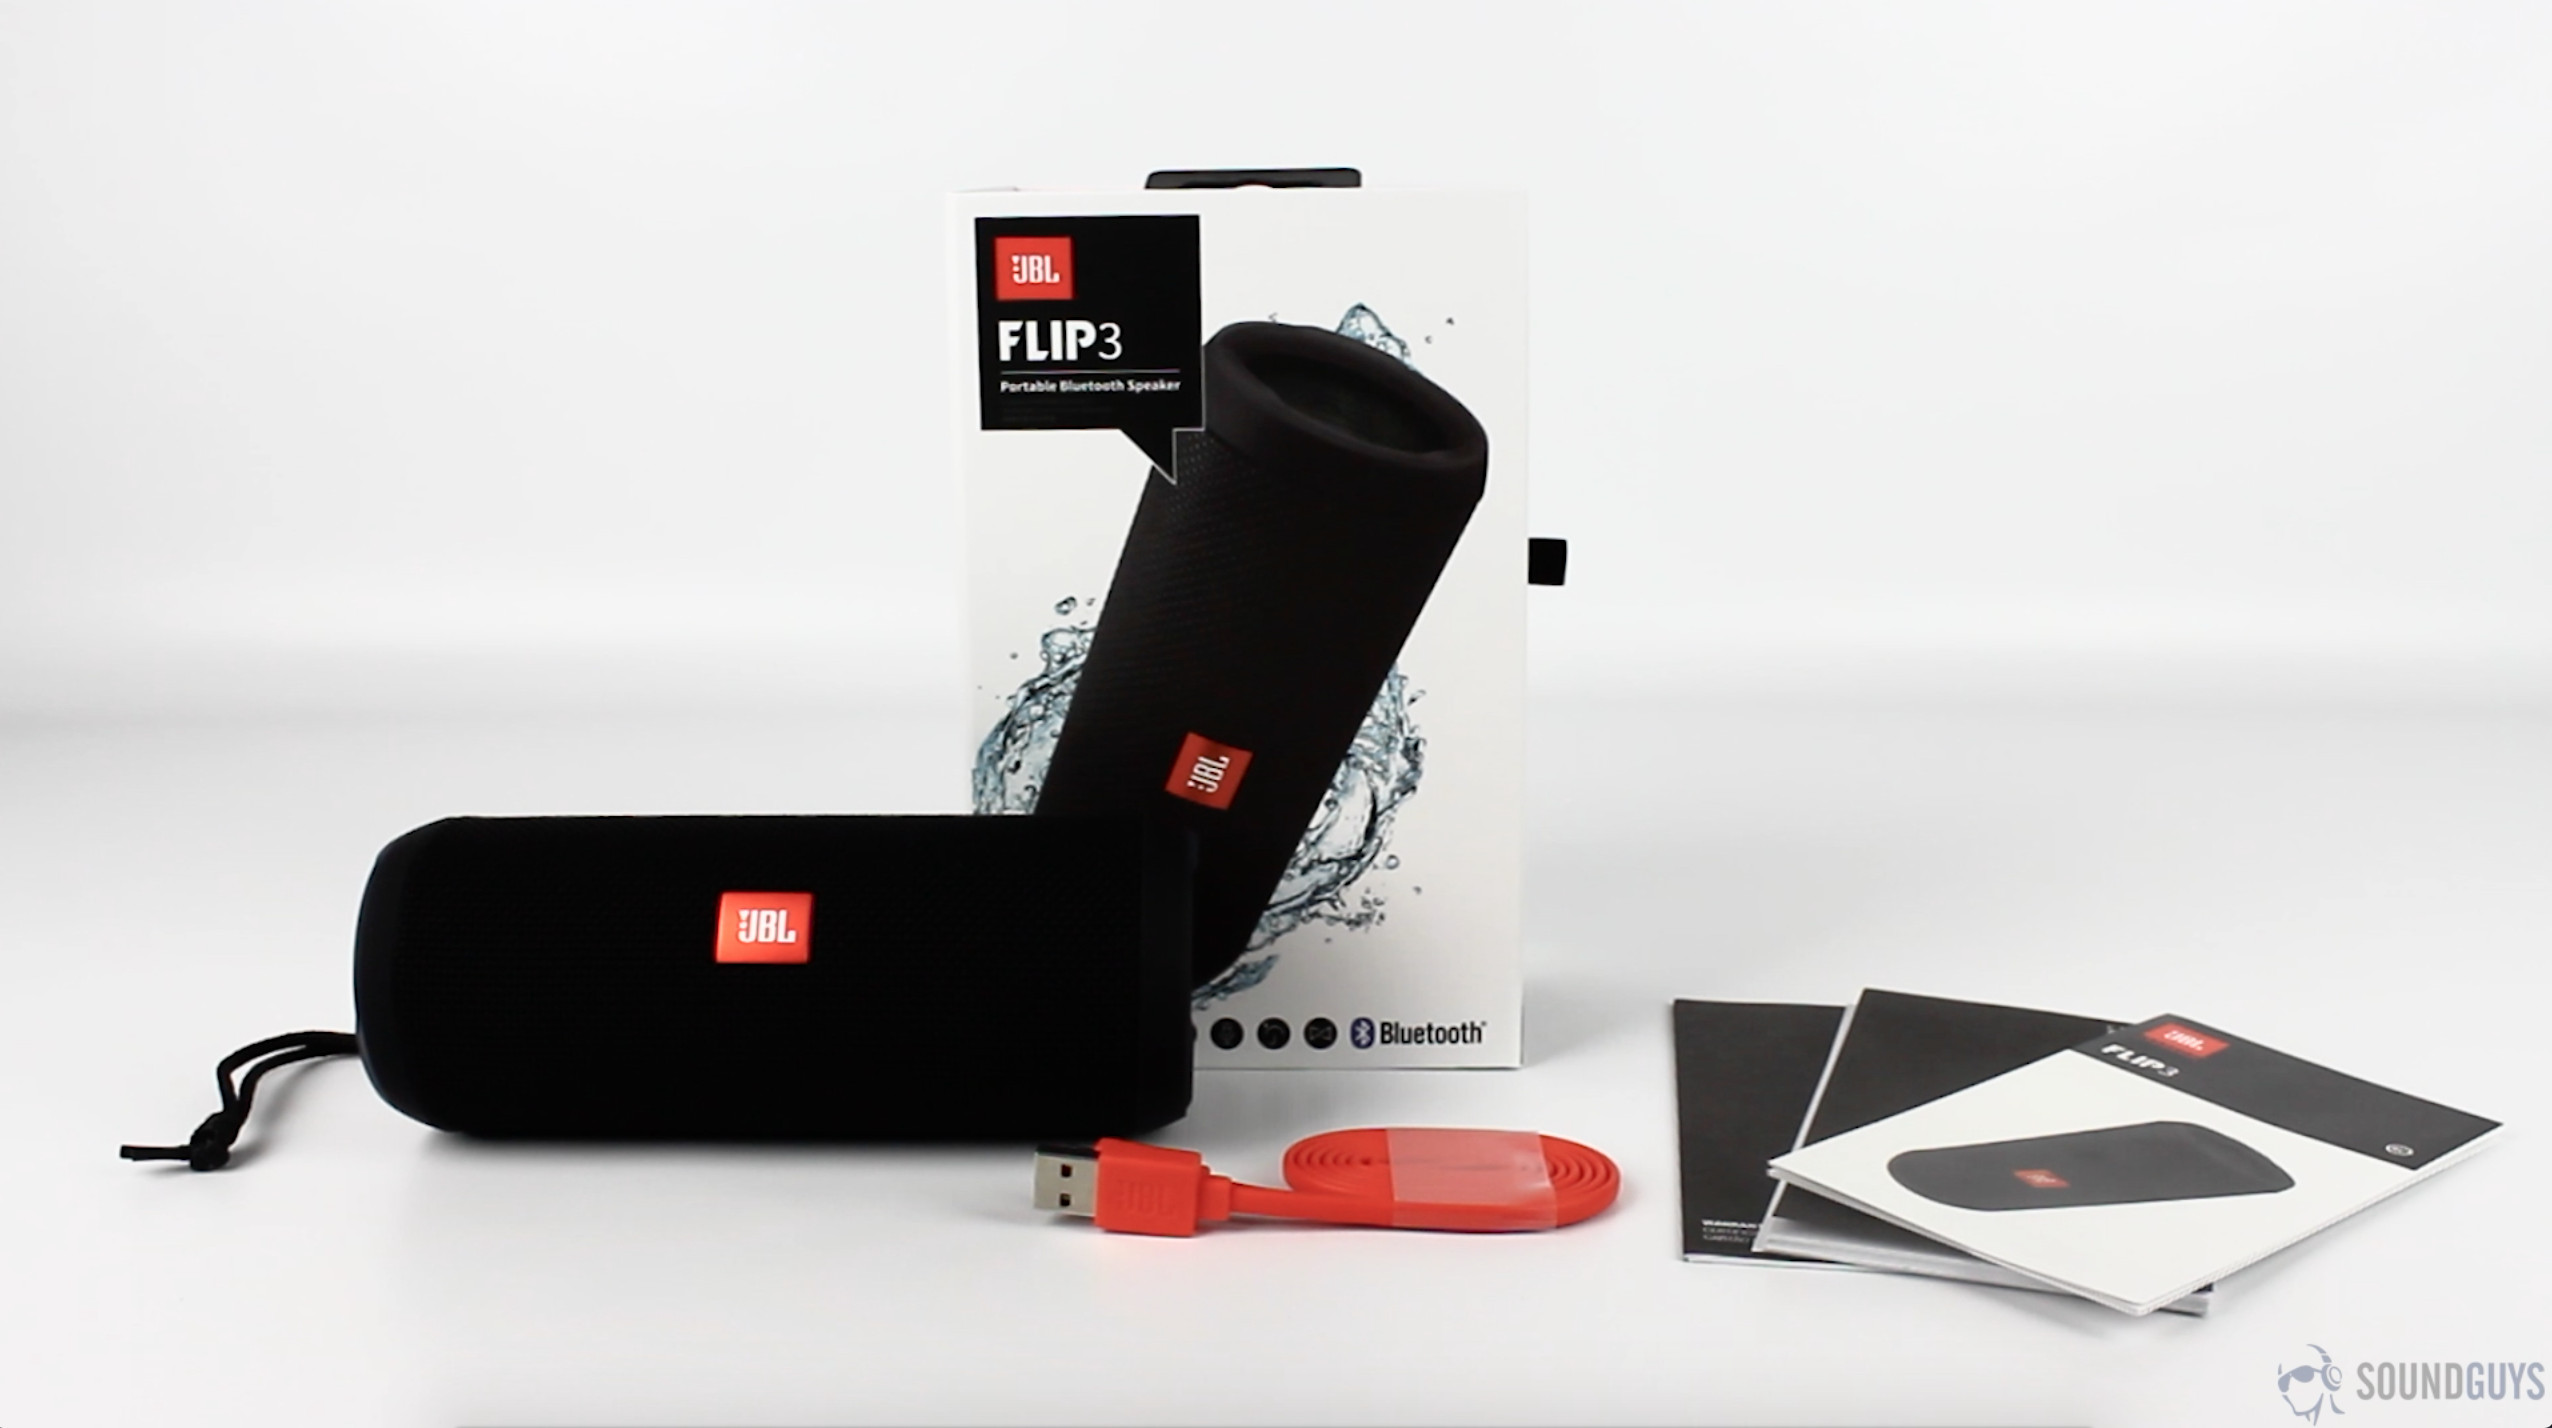 Pictured are the contents of the box that the JBL Flip 3 comes in. 